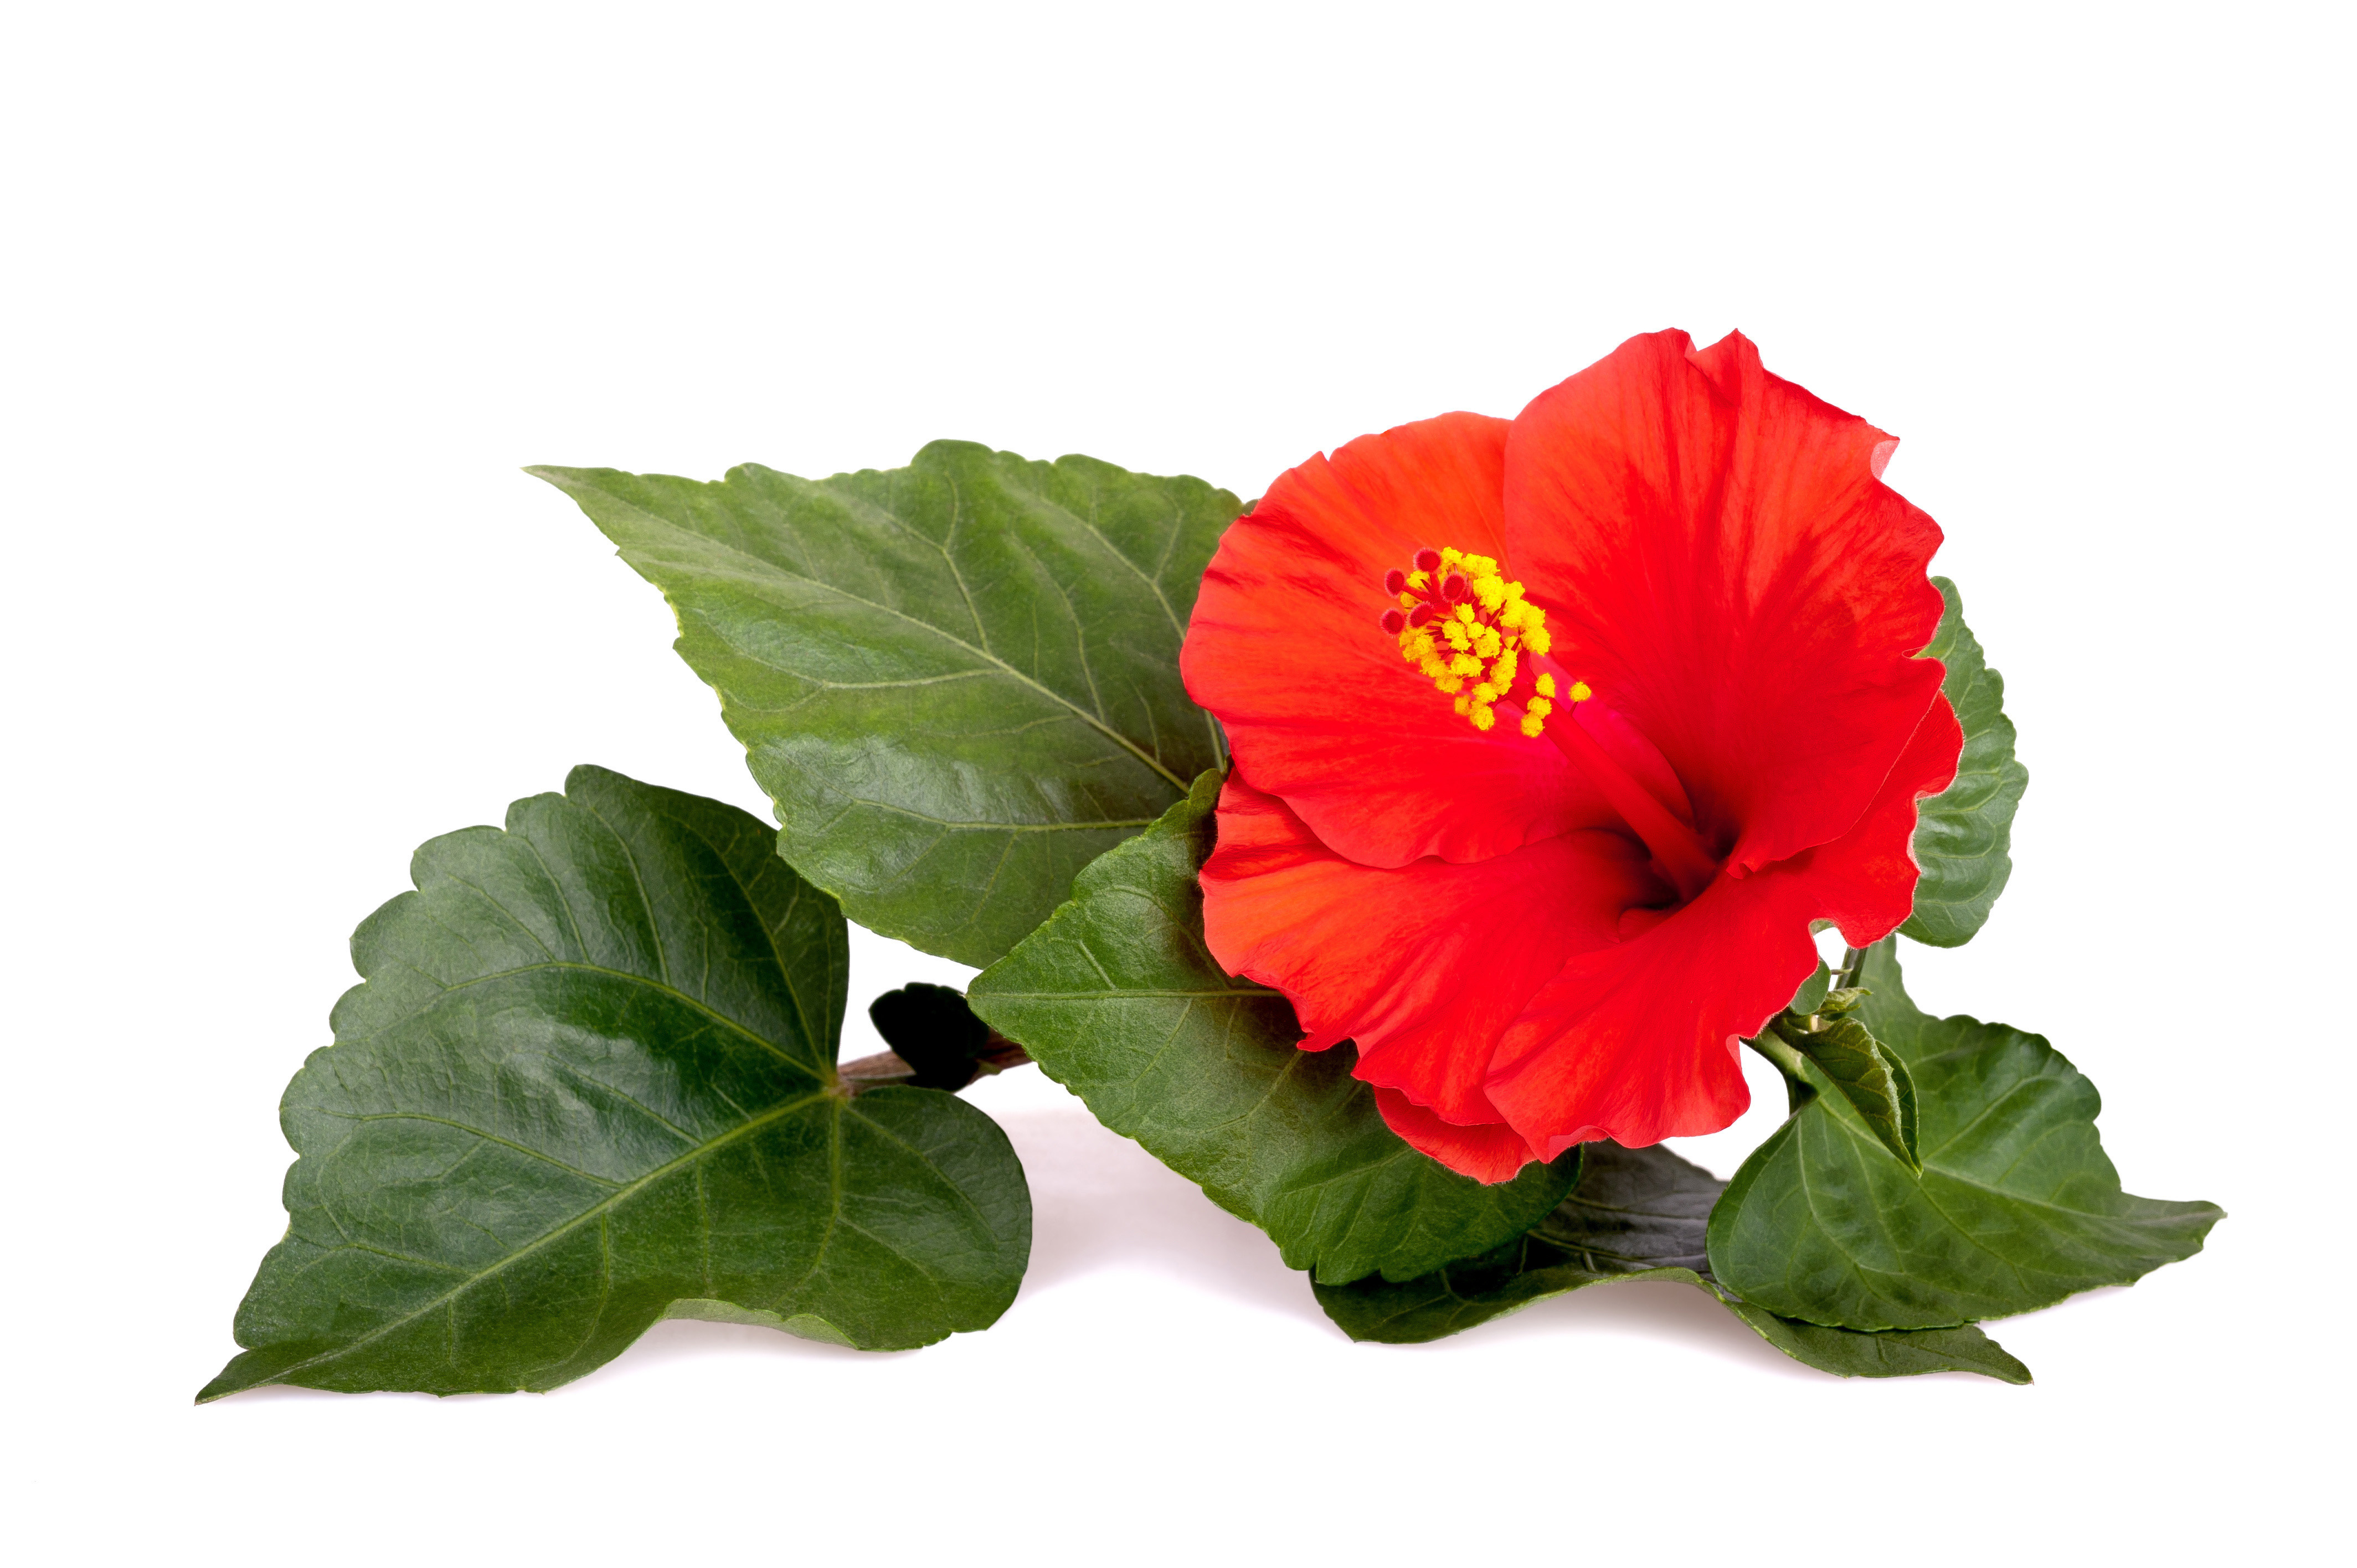 Red hibiscus flower isolated on white background.